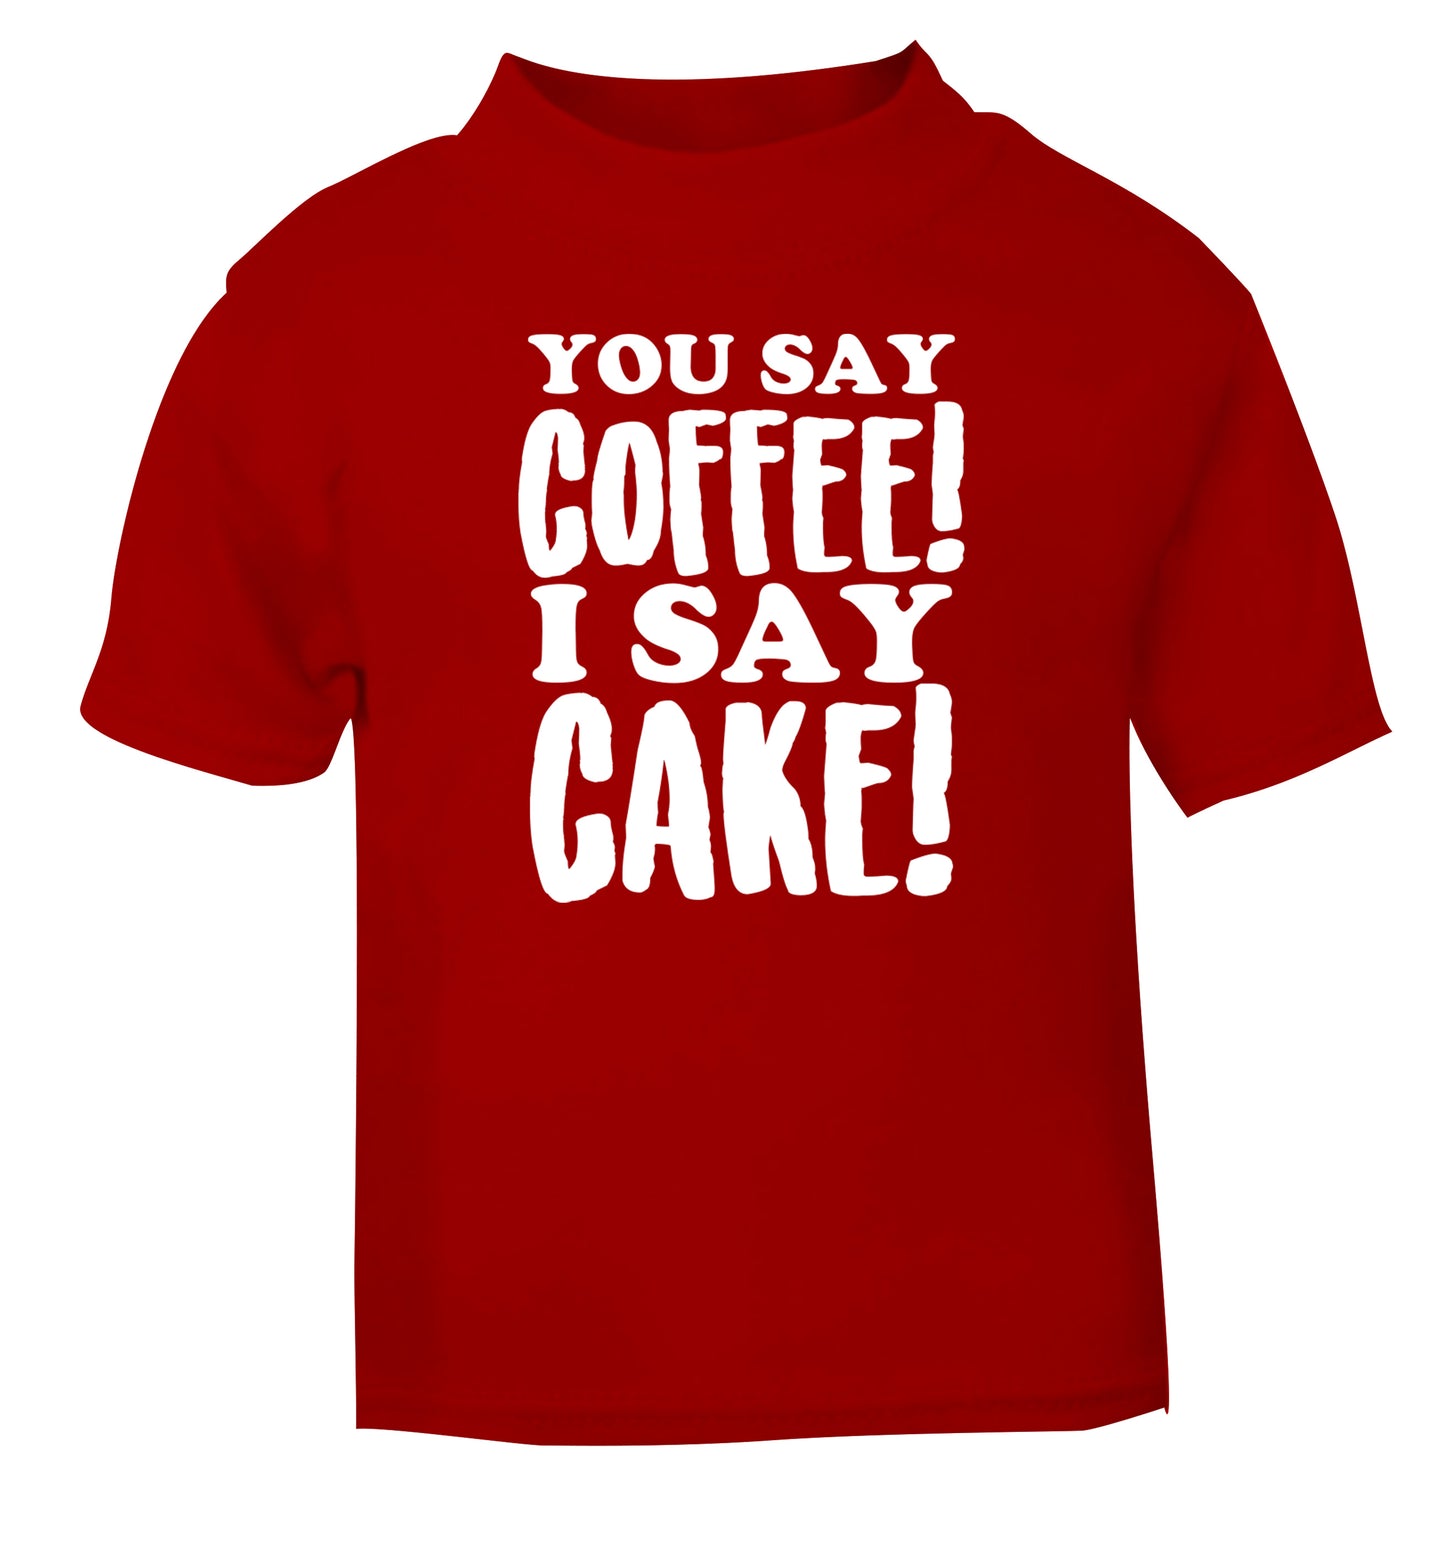 You say coffee I say cake! red Baby Toddler Tshirt 2 Years